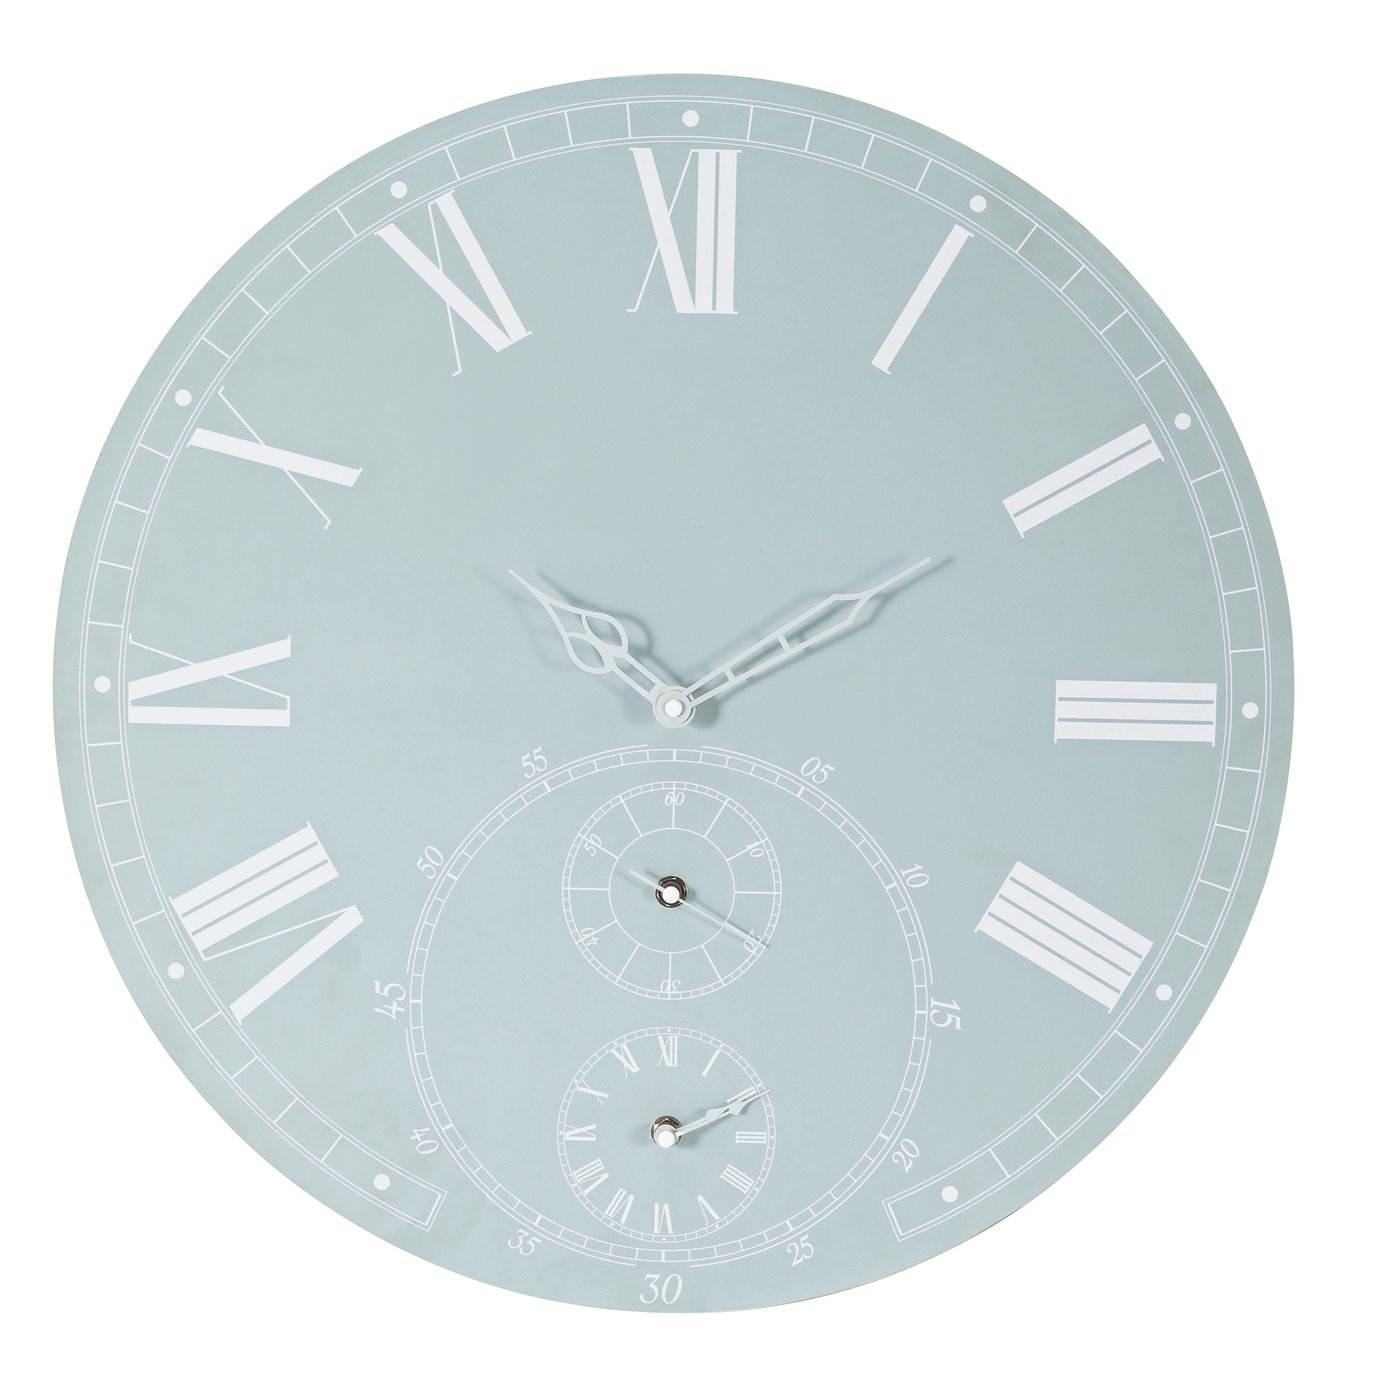 Argos Home Vintage Wall Clock Review